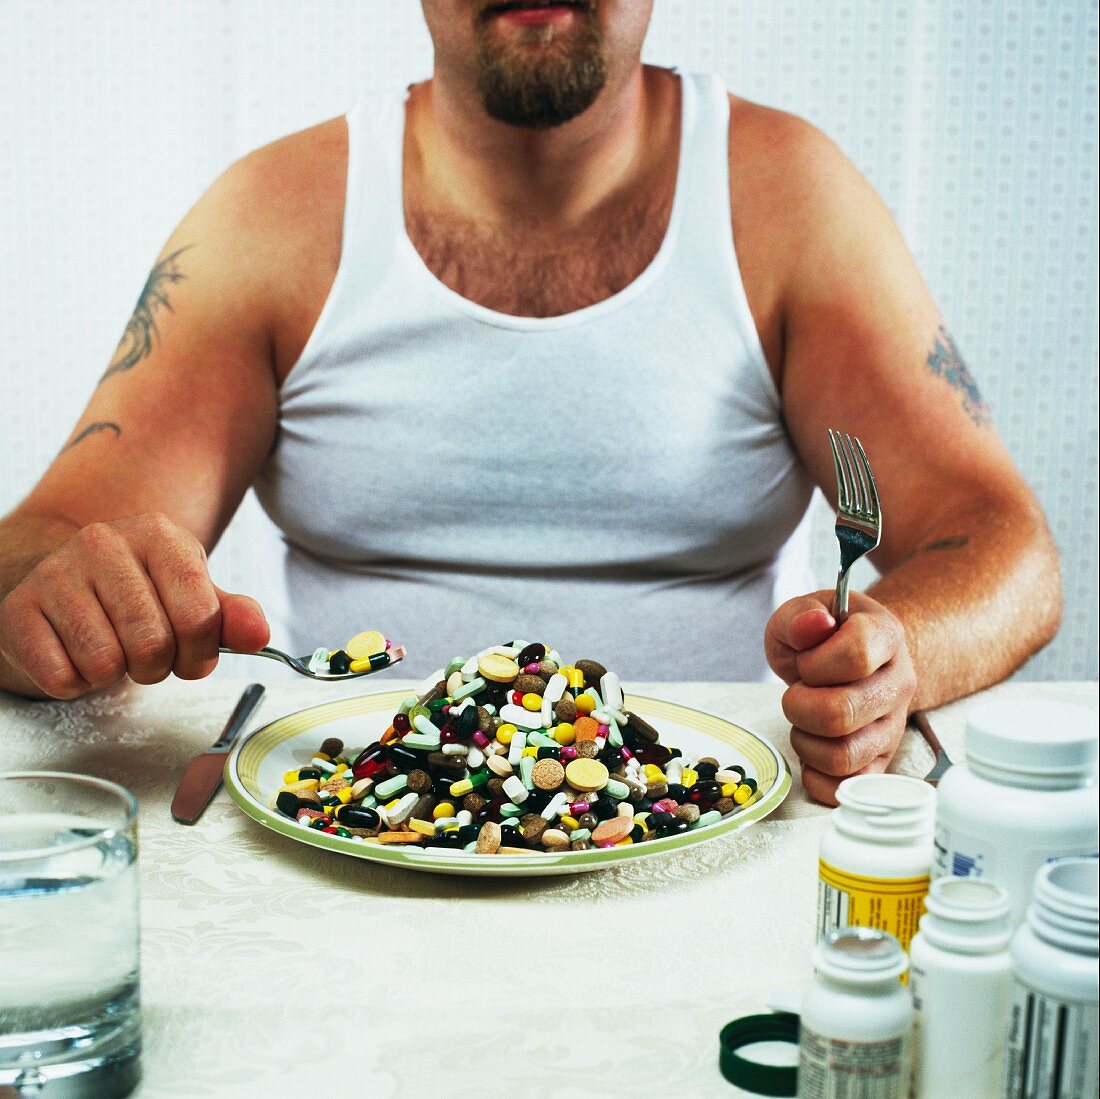 Overweight man eating plate full of pills